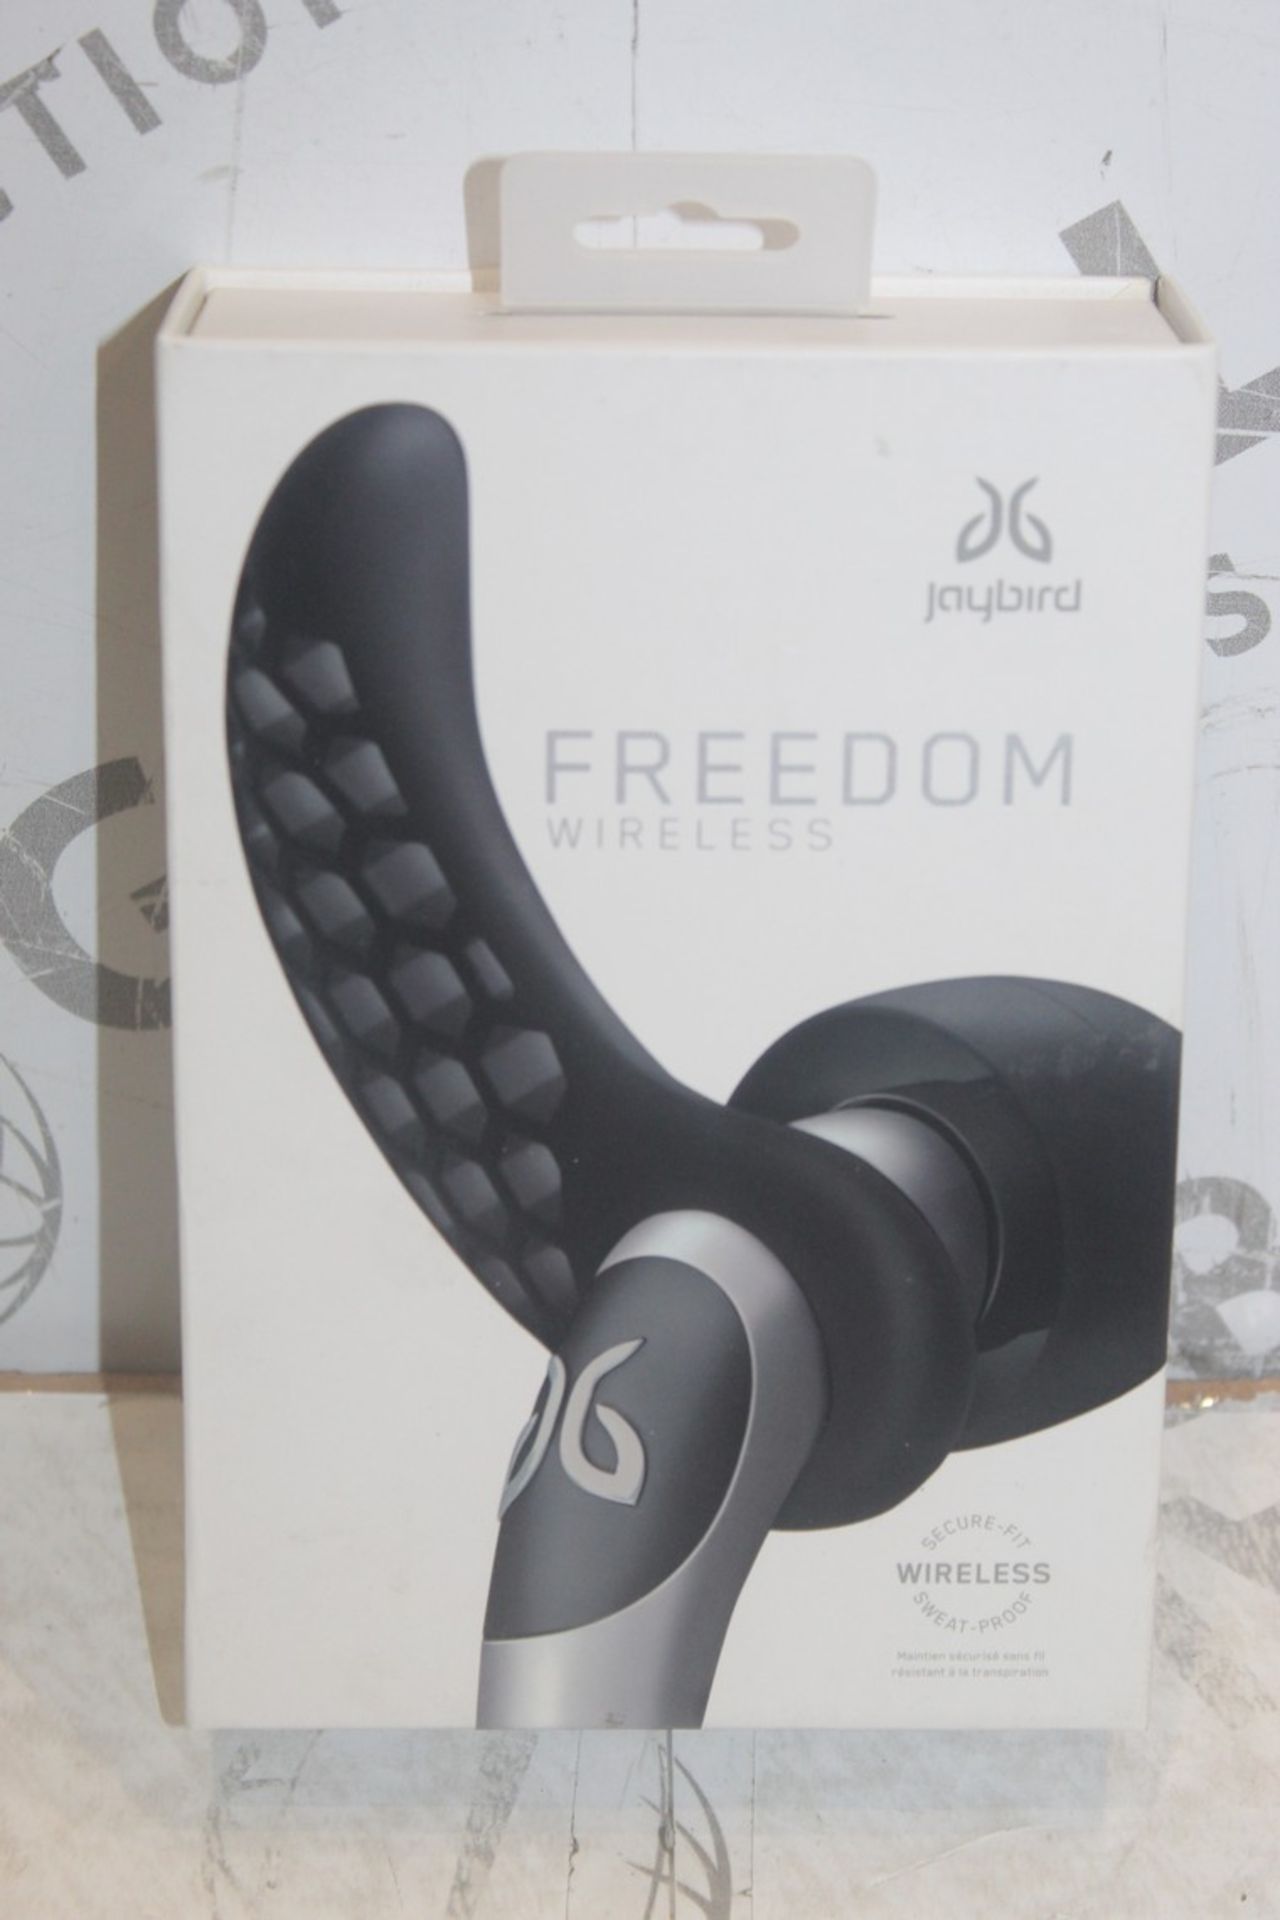 Boxed Pair Jaybird Freedom Secure Fit Sweat Proof Wireless Earphones RRP £170 (Pictures Are For